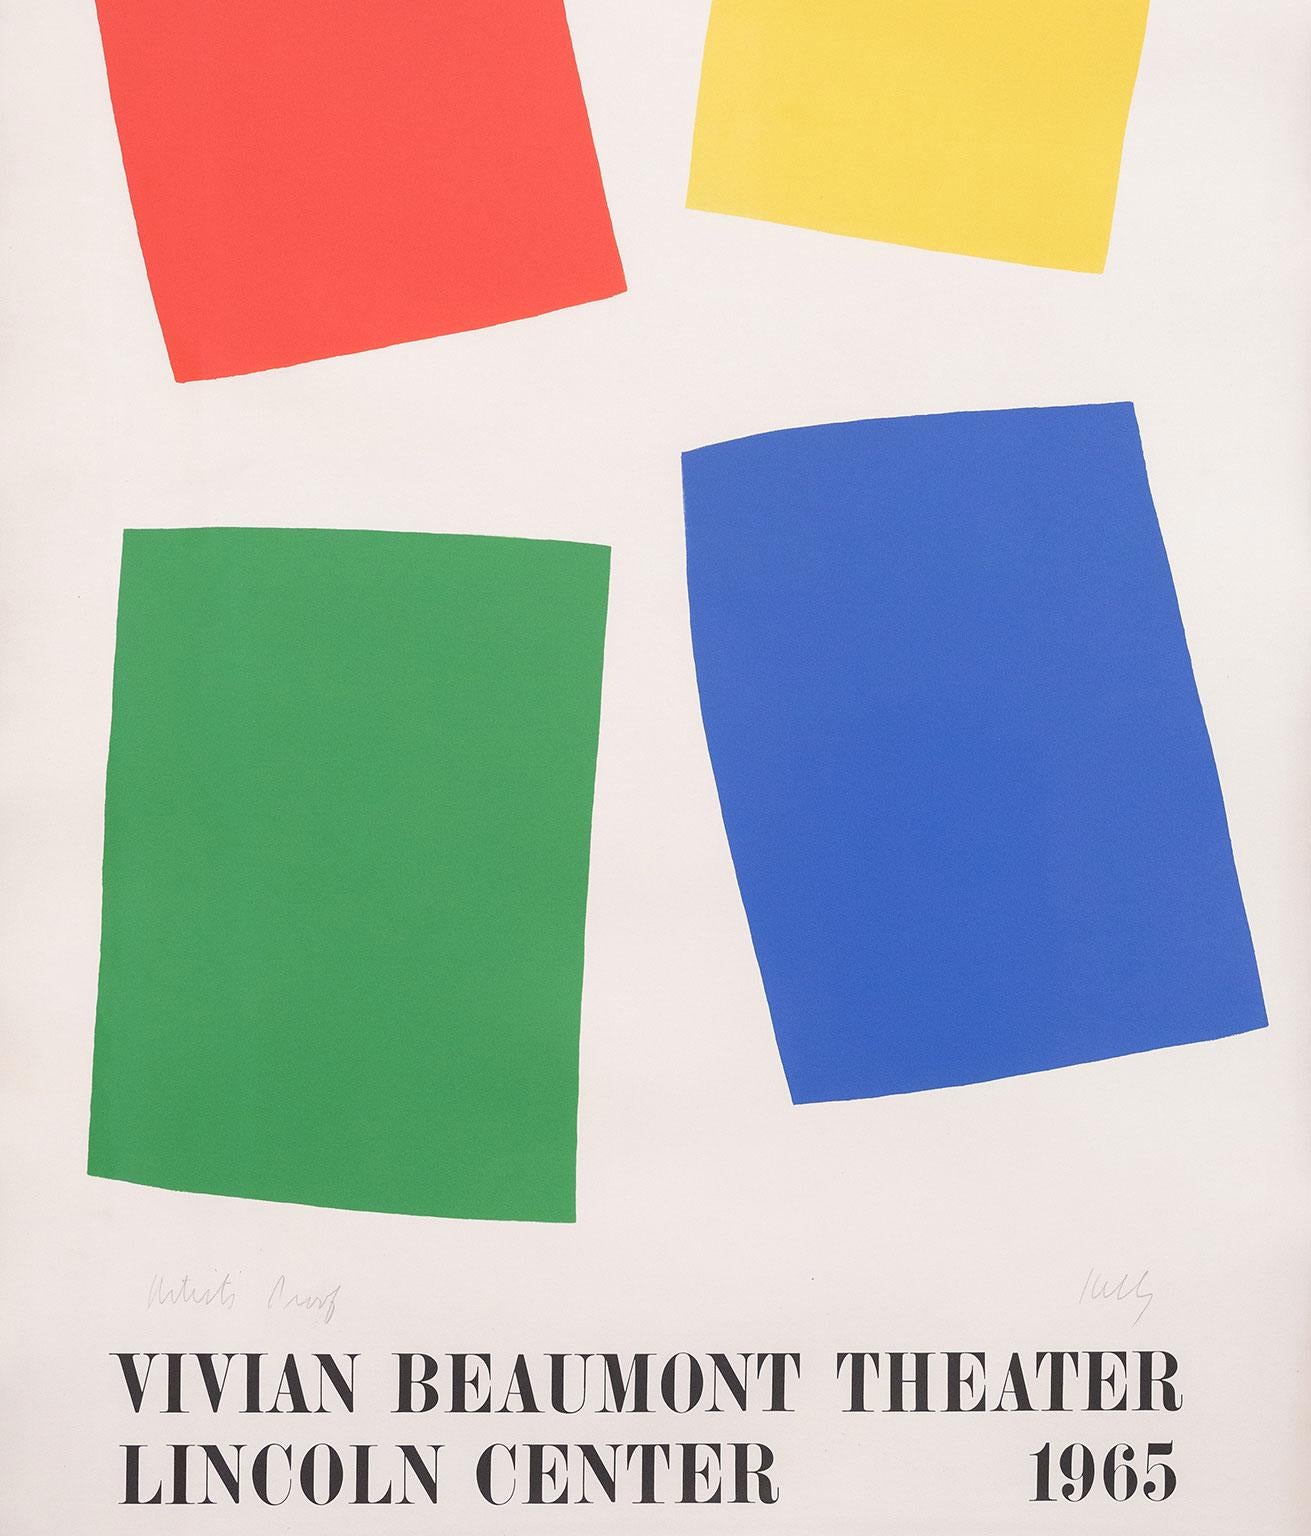 Vivian Beaumont Theatre, Lincoln Centre, Lithograph on Rives BFK paper, 1965 - Minimalist Print by Ellsworth Kelly